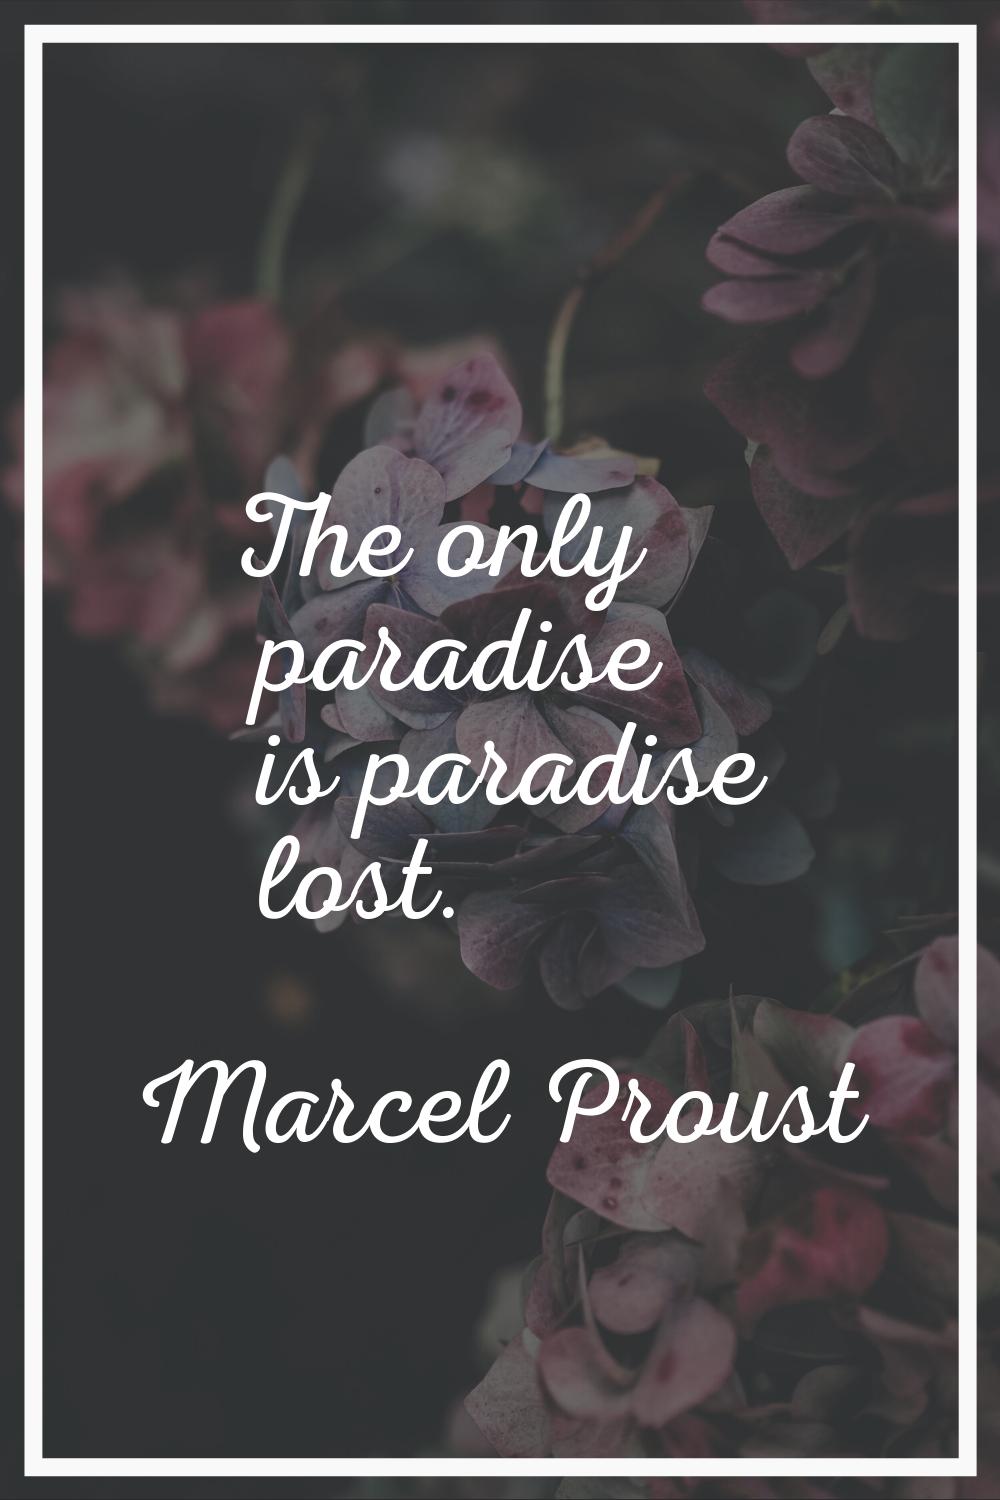 The only paradise is paradise lost.